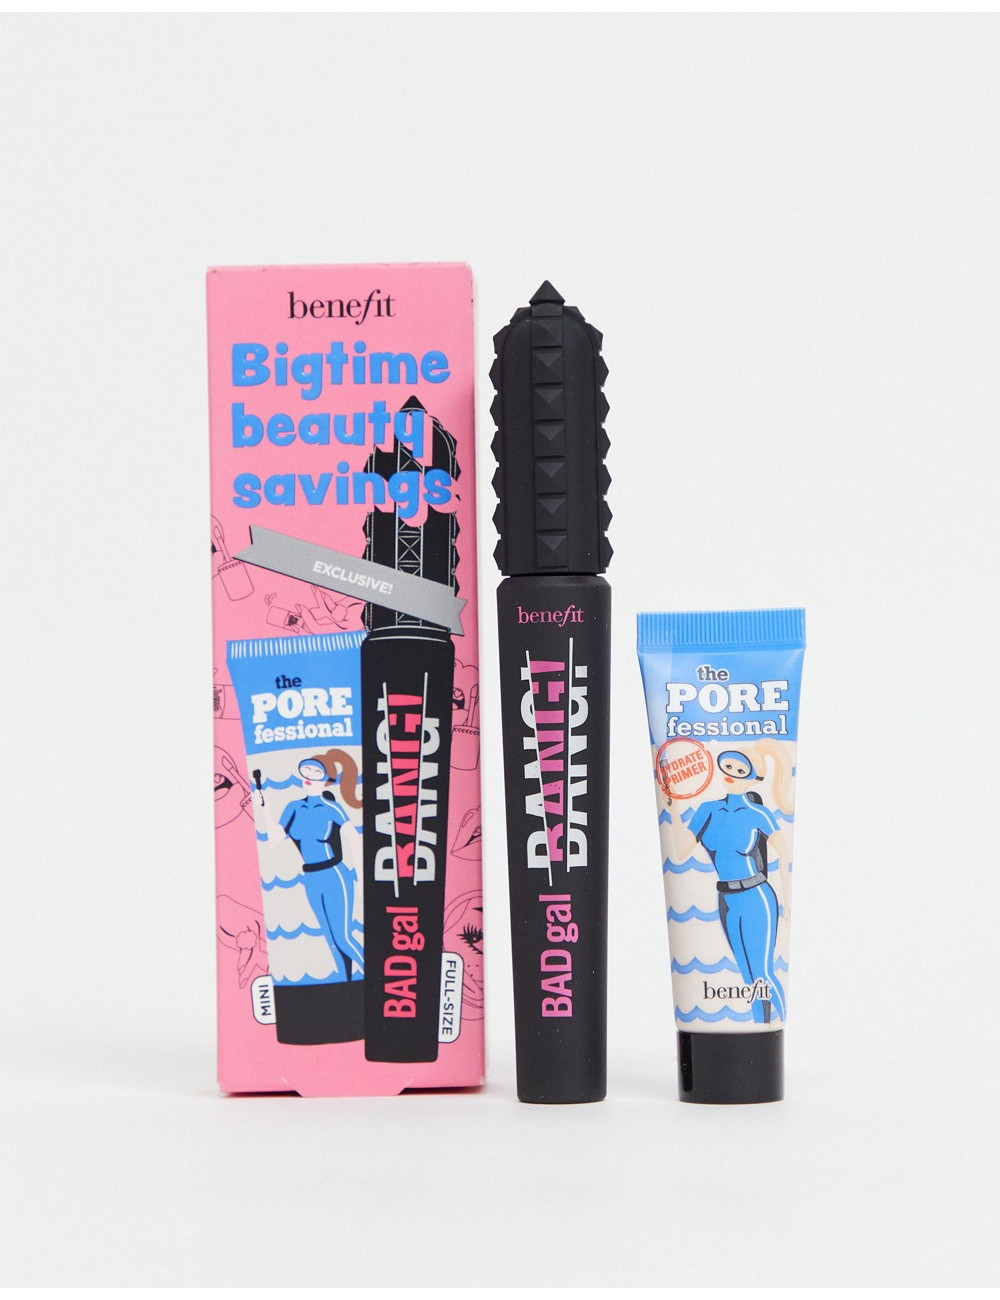 Benefit Bigtime Beauty...